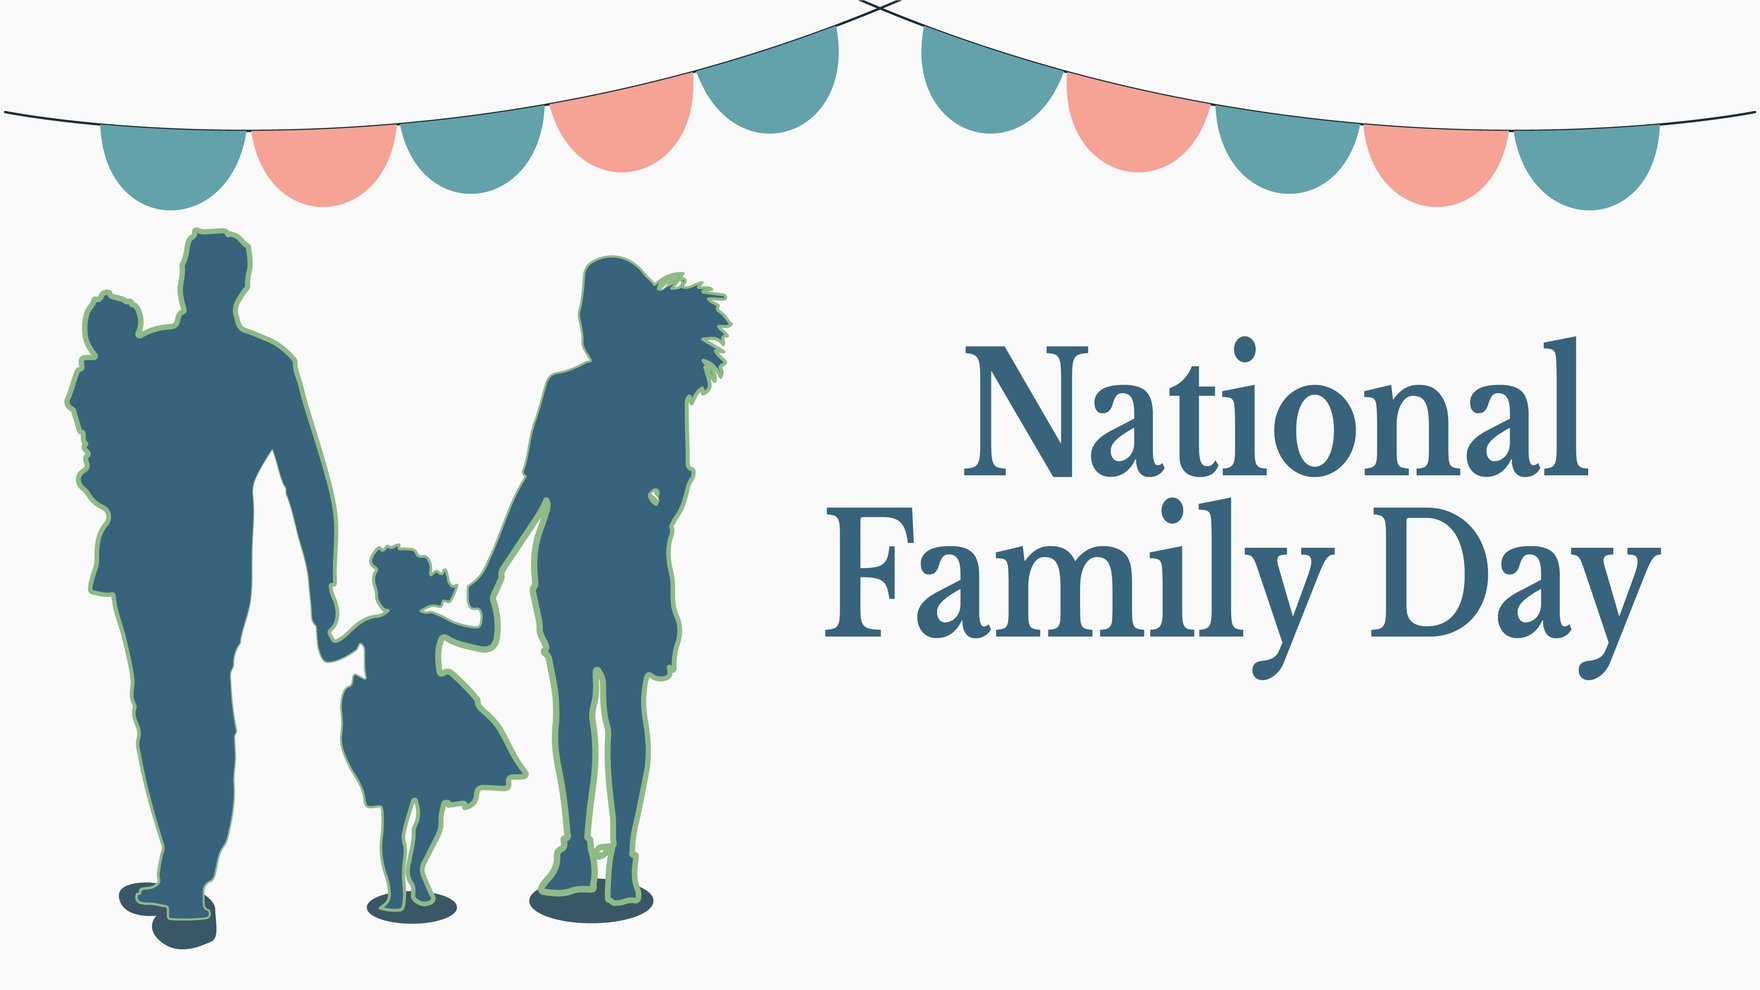 Free National Family Day Image Background in PDF, Illustrator, PSD, EPS, SVG, JPG, PNG